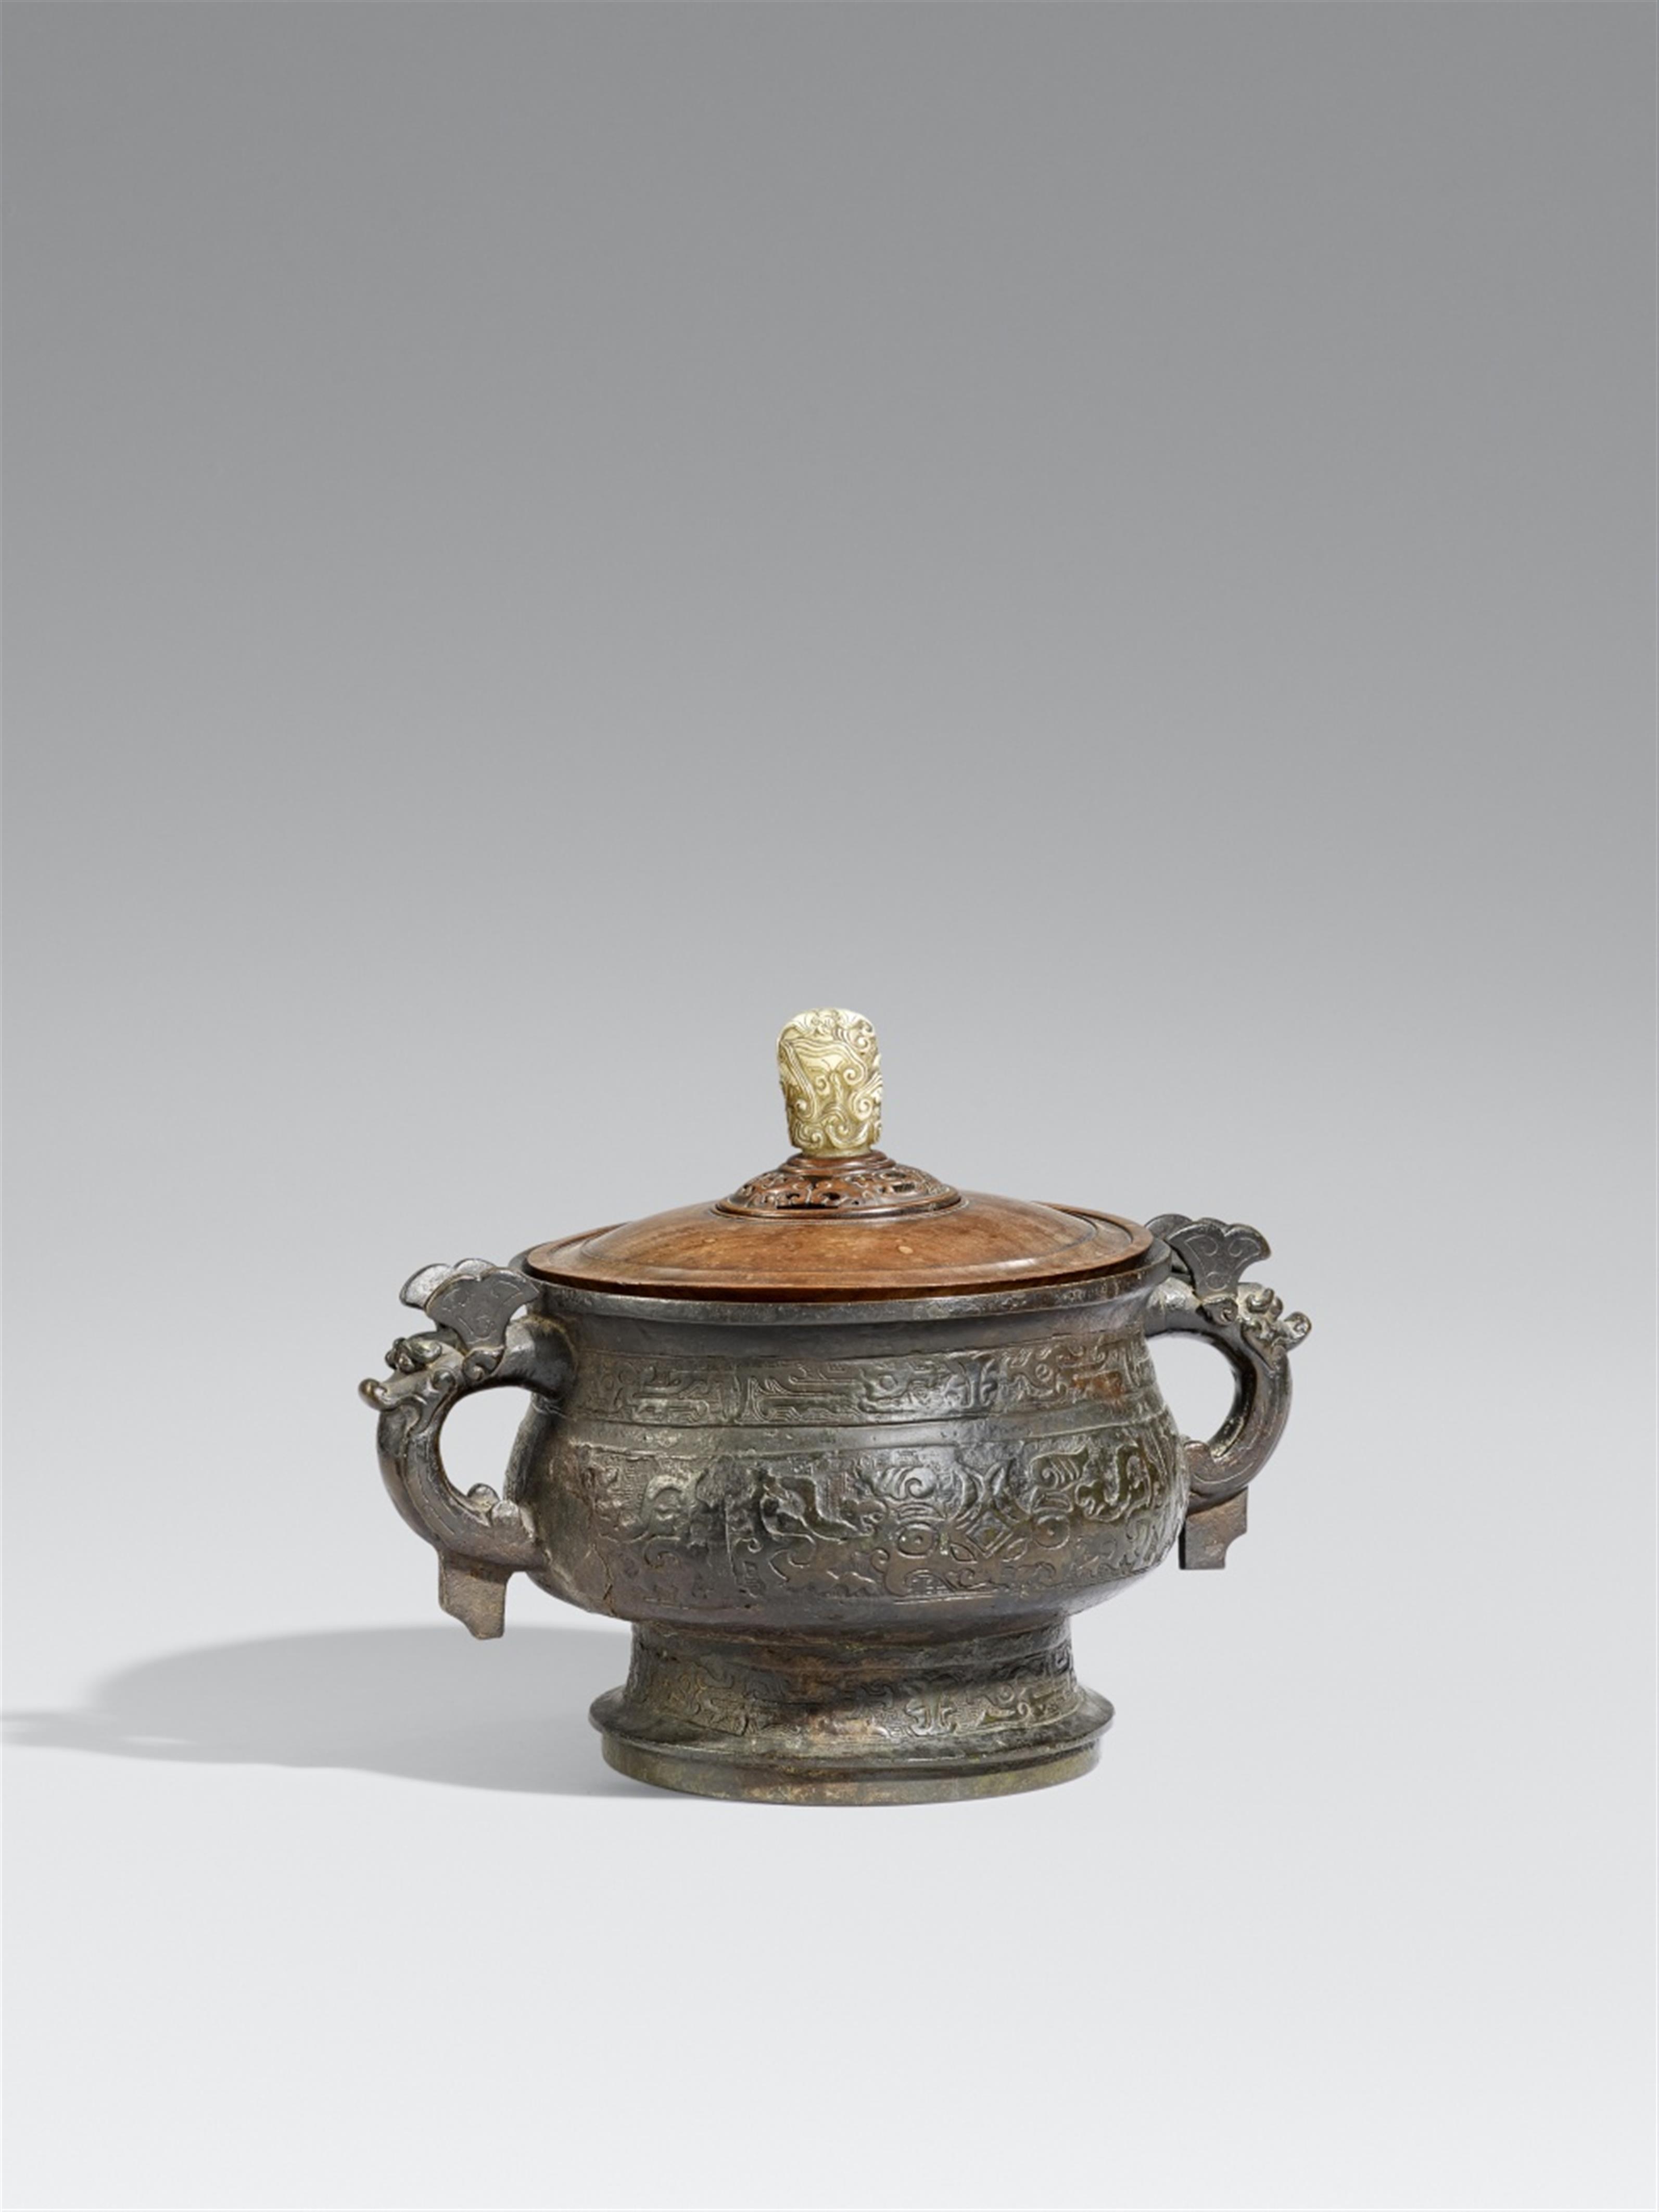 A very large gui-type bronze vessel. Ming/Qing dynasty, 16th/17th century - image-1